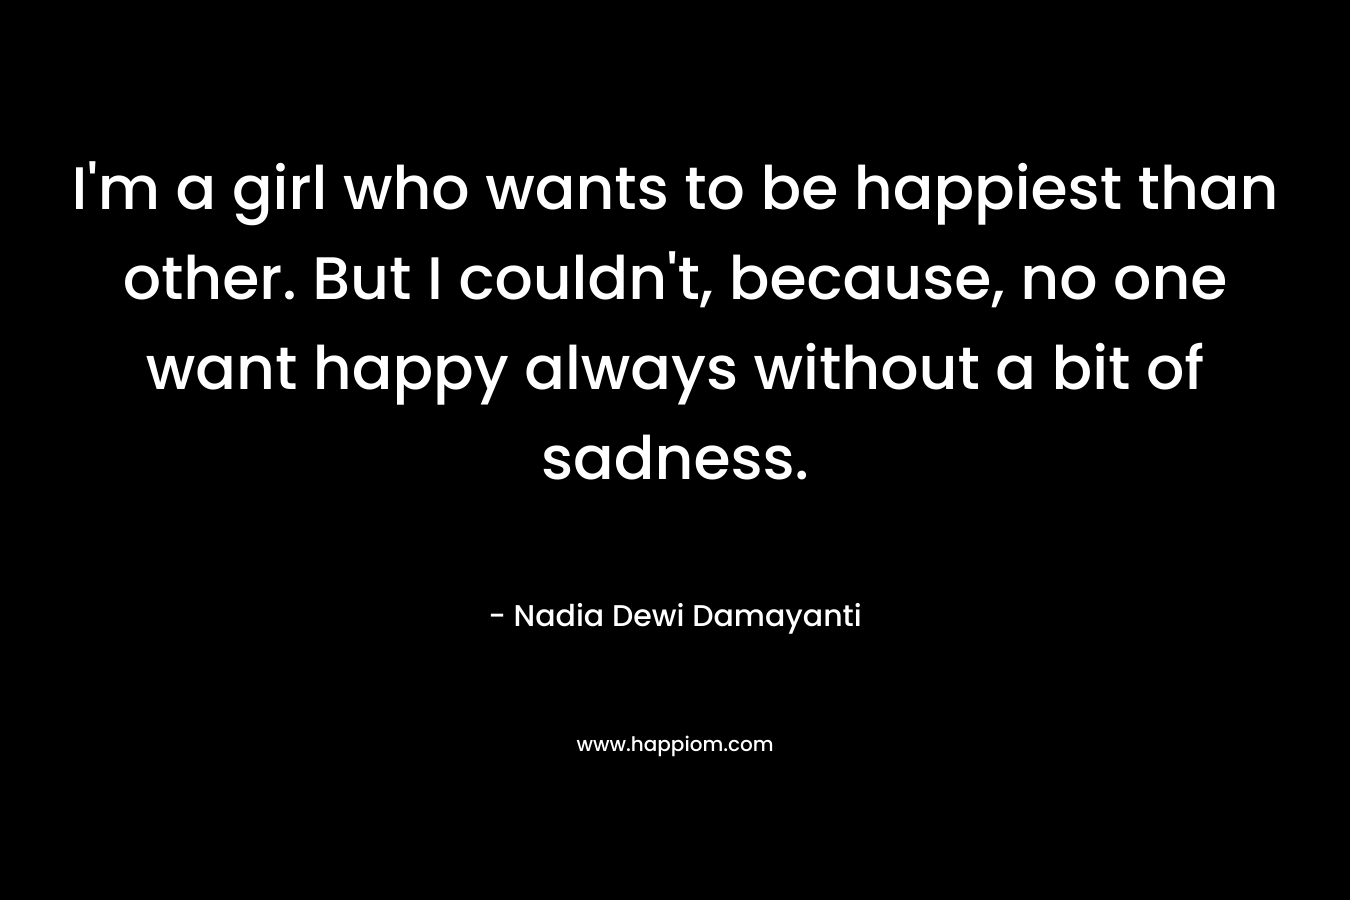 I’m a girl who wants to be happiest than other. But I couldn’t, because, no one want happy always without a bit of sadness. – Nadia Dewi Damayanti